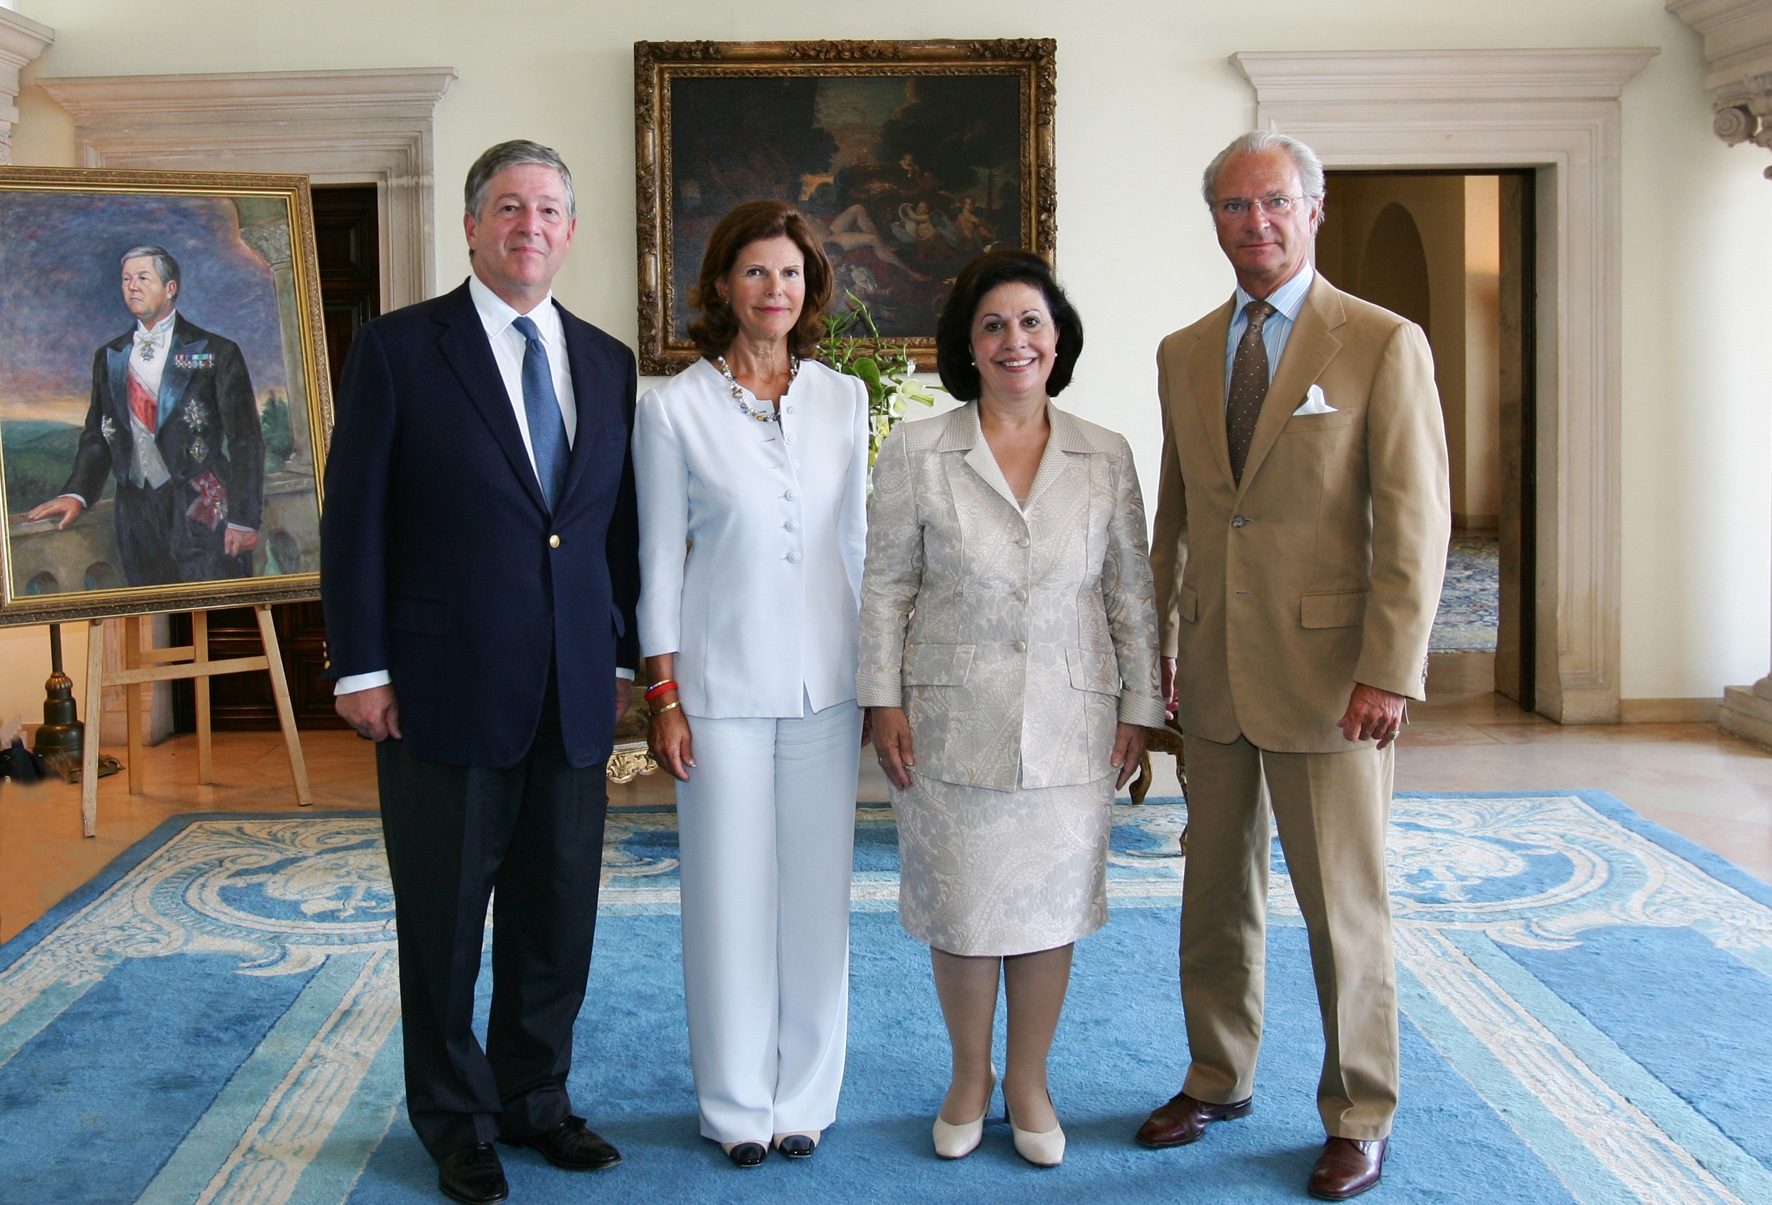 HM King Carl XVI Gustav and HM Queen Silvia of Sweden, HRH Crown Prince Alexander and HRH Crown Princess Katherine